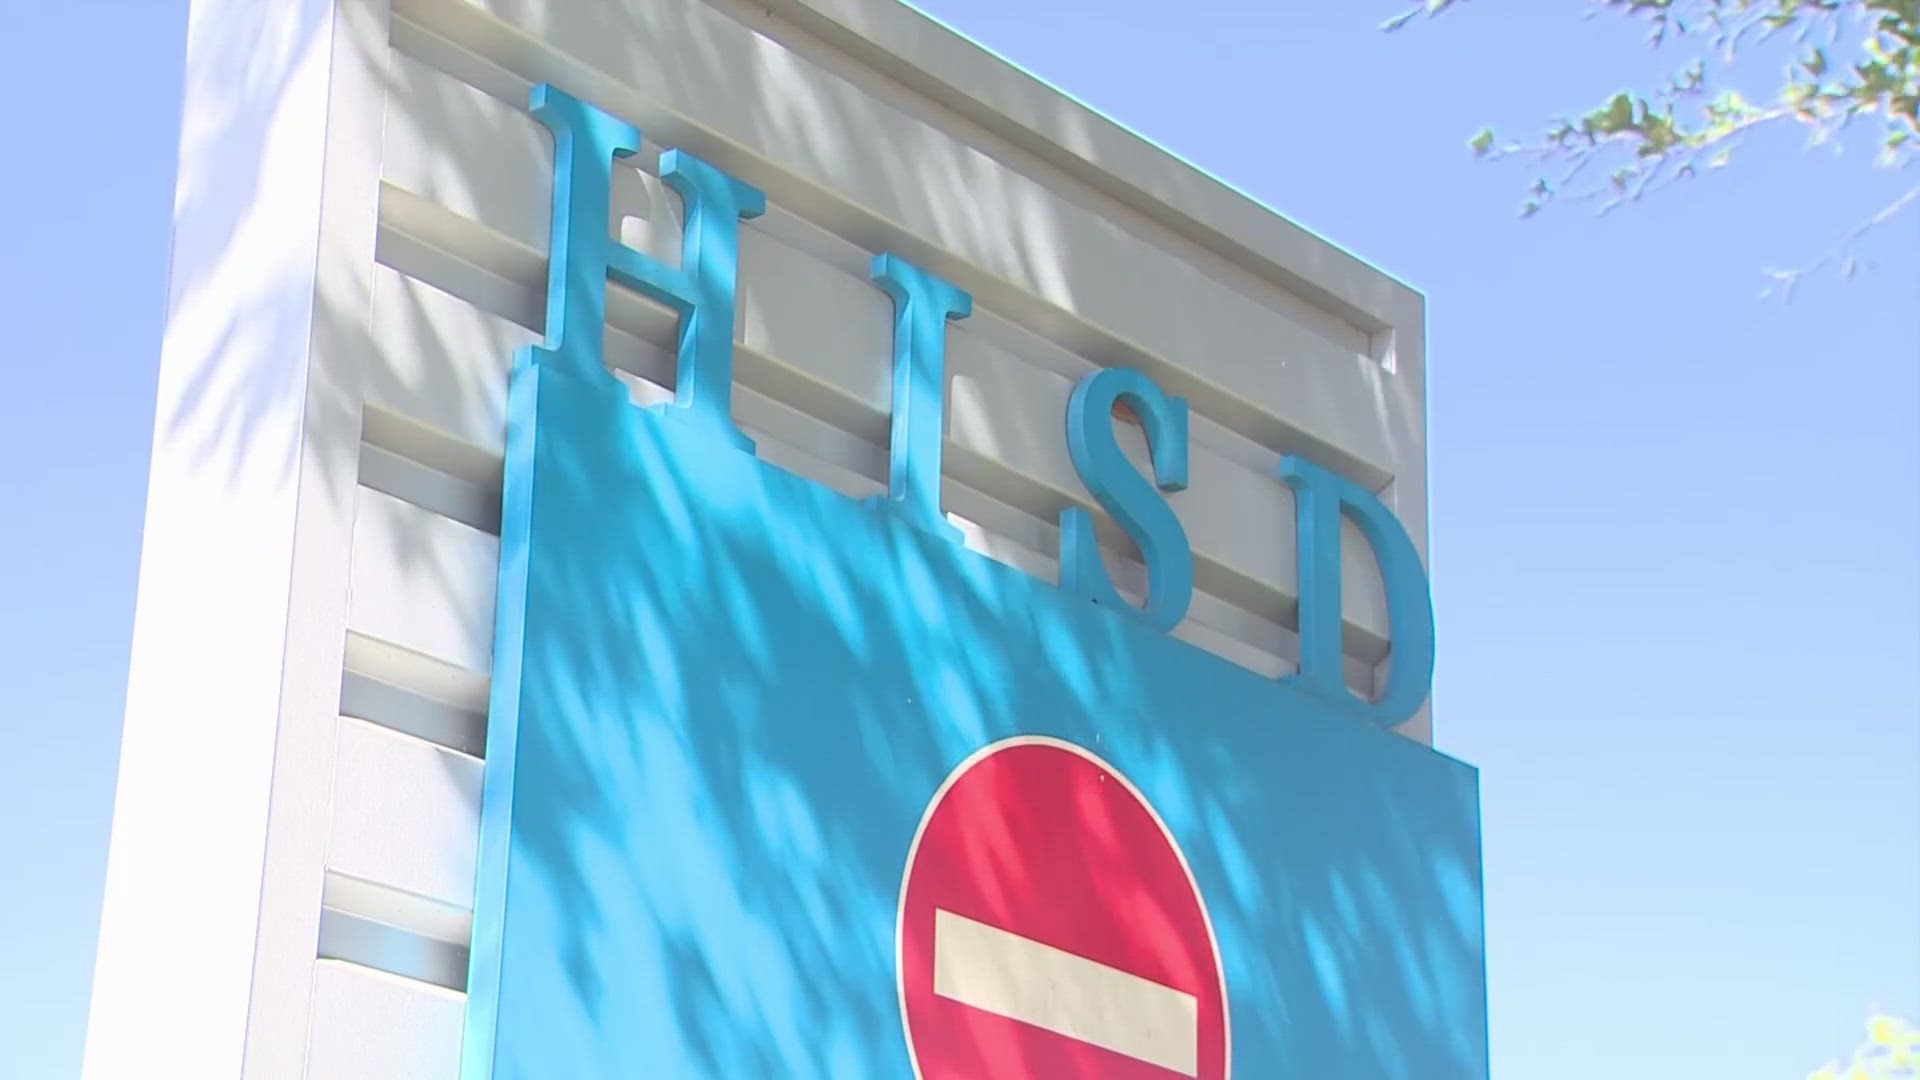 KHOU 11's Lauren Talarico spoke with some HISD parents, some of which said they are just confused about the takeover.